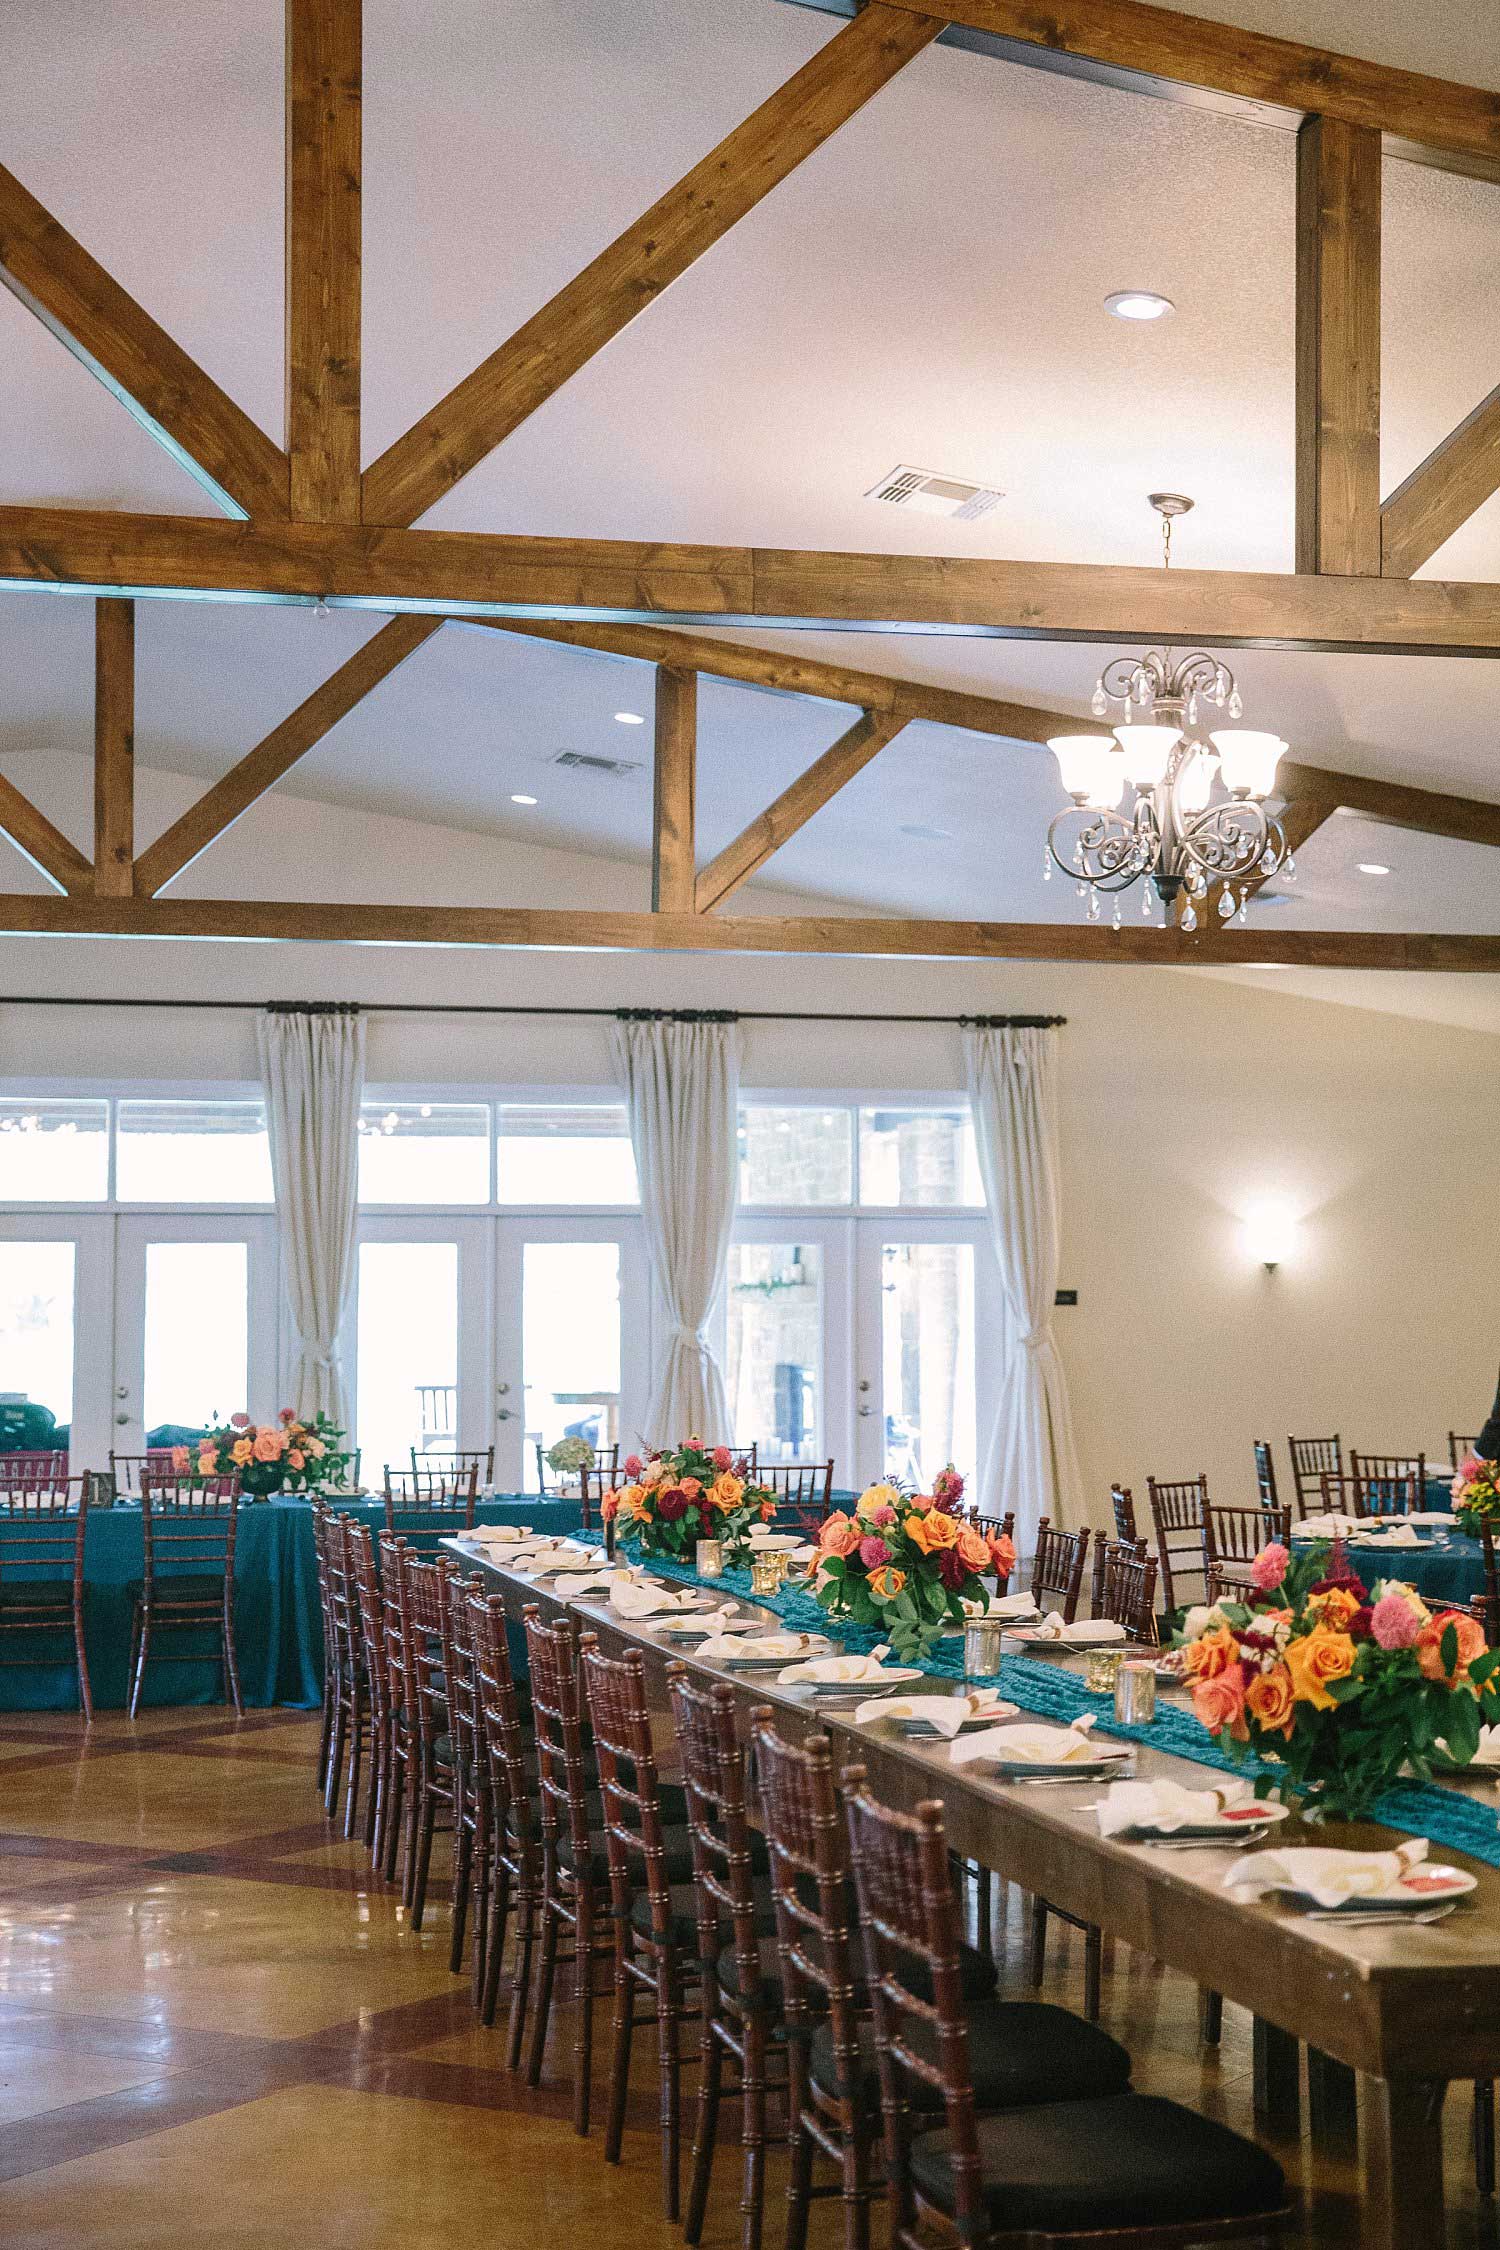 The orchard Azle TX wedding reception with blue tablecloths and a farm table